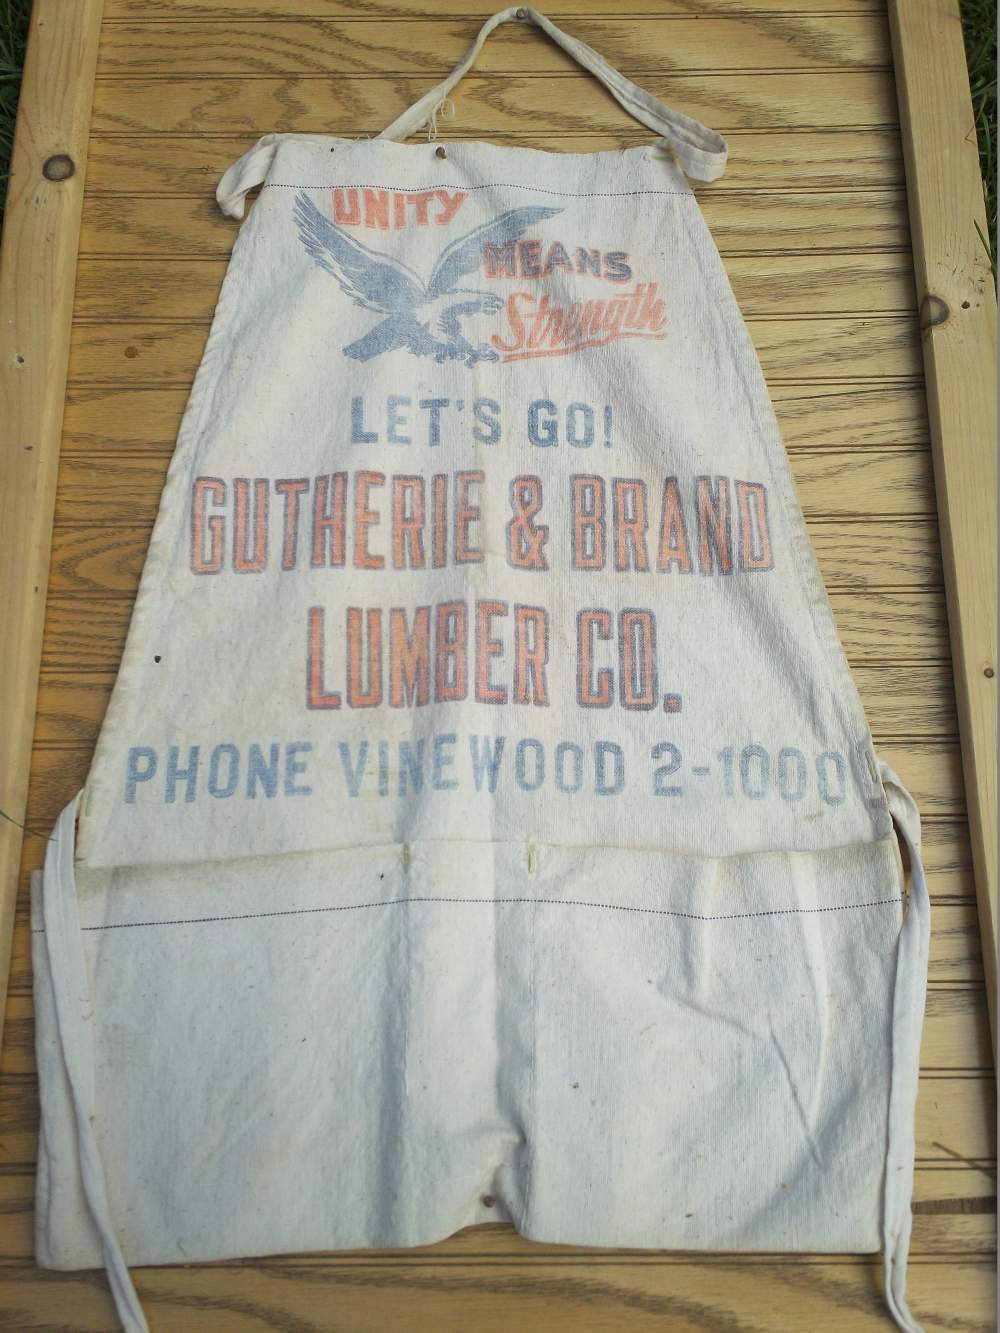 Name:  GLC Gutherie and Brand Lumber.jpg
Views: 798
Size:  142.7 KB